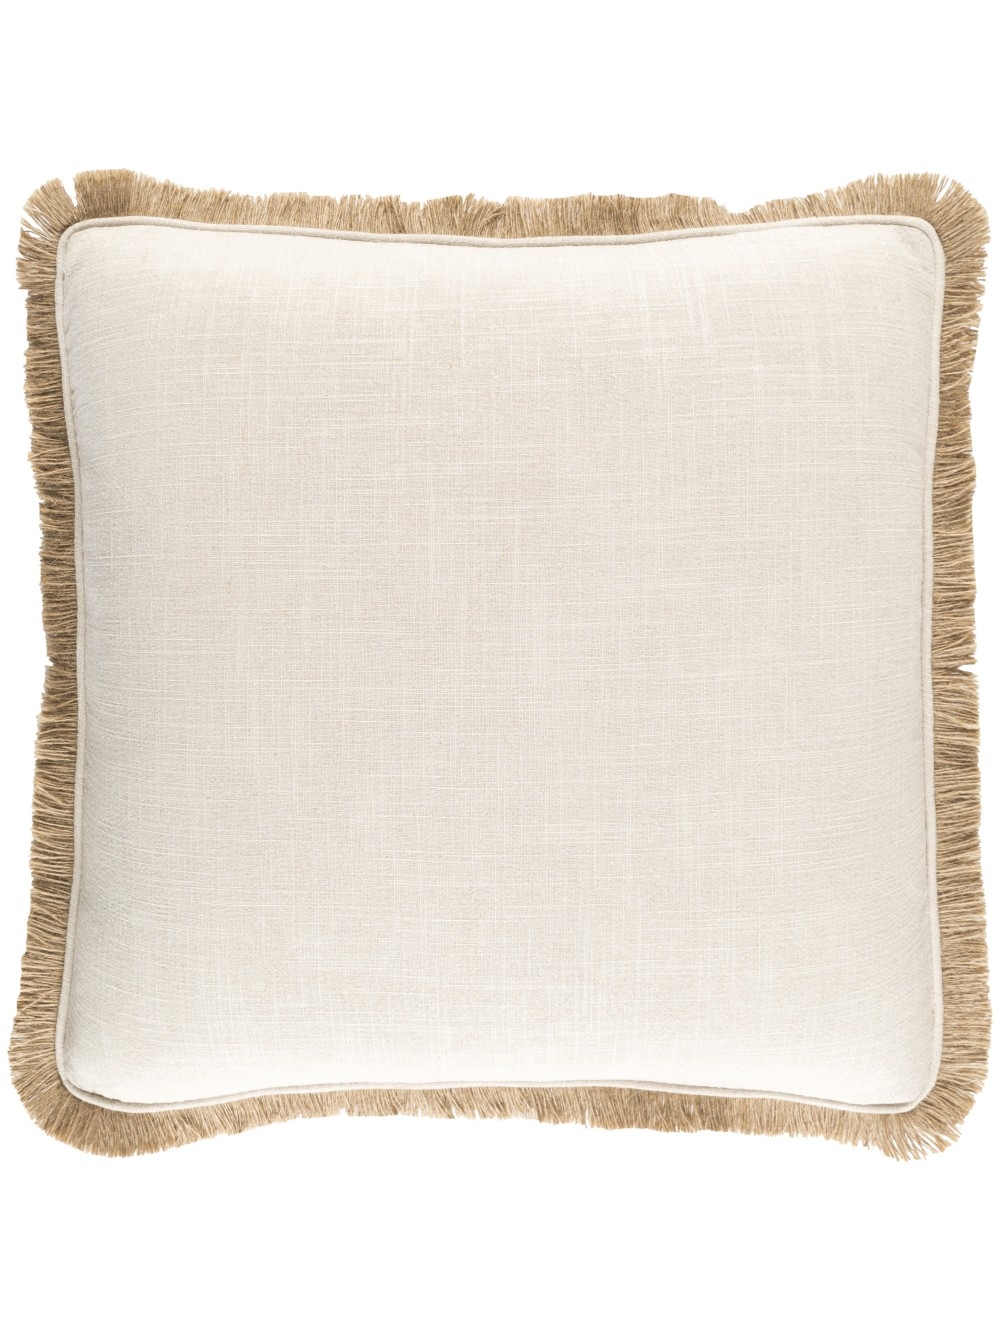 GUIDA PILLOW, IVORY - 20x20 - Poly filled - Image 0